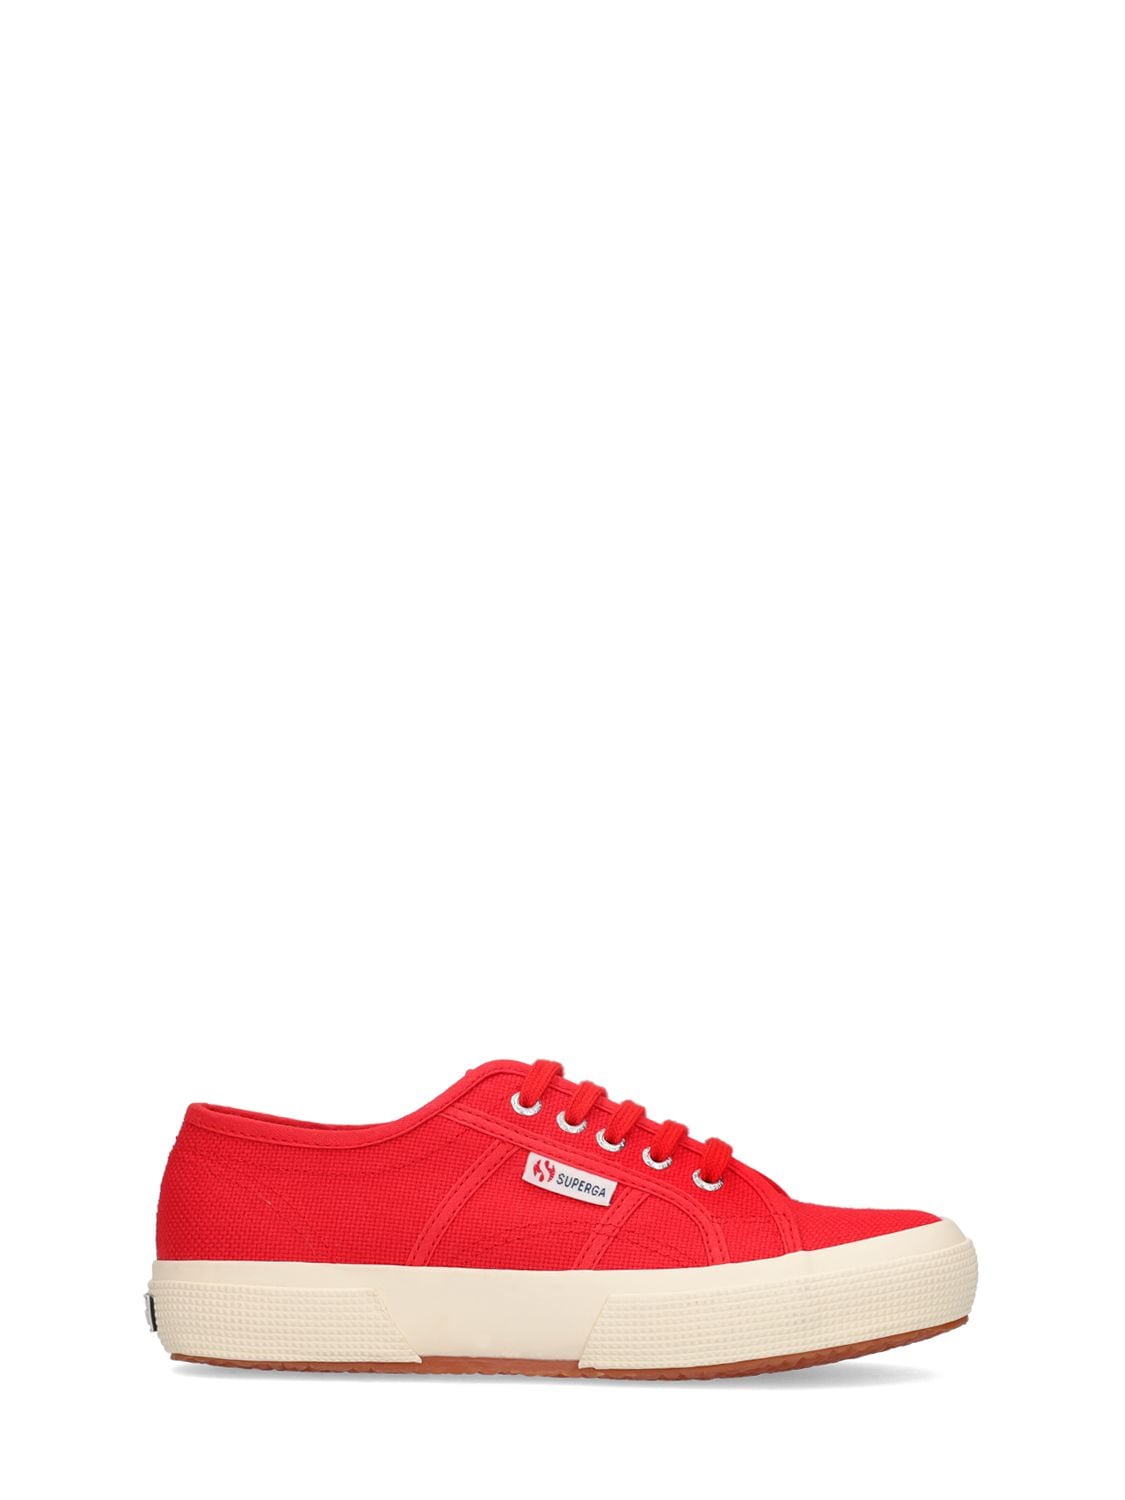 Superga Kids' 2750-jcot Classic Canvas Sneakers In Red